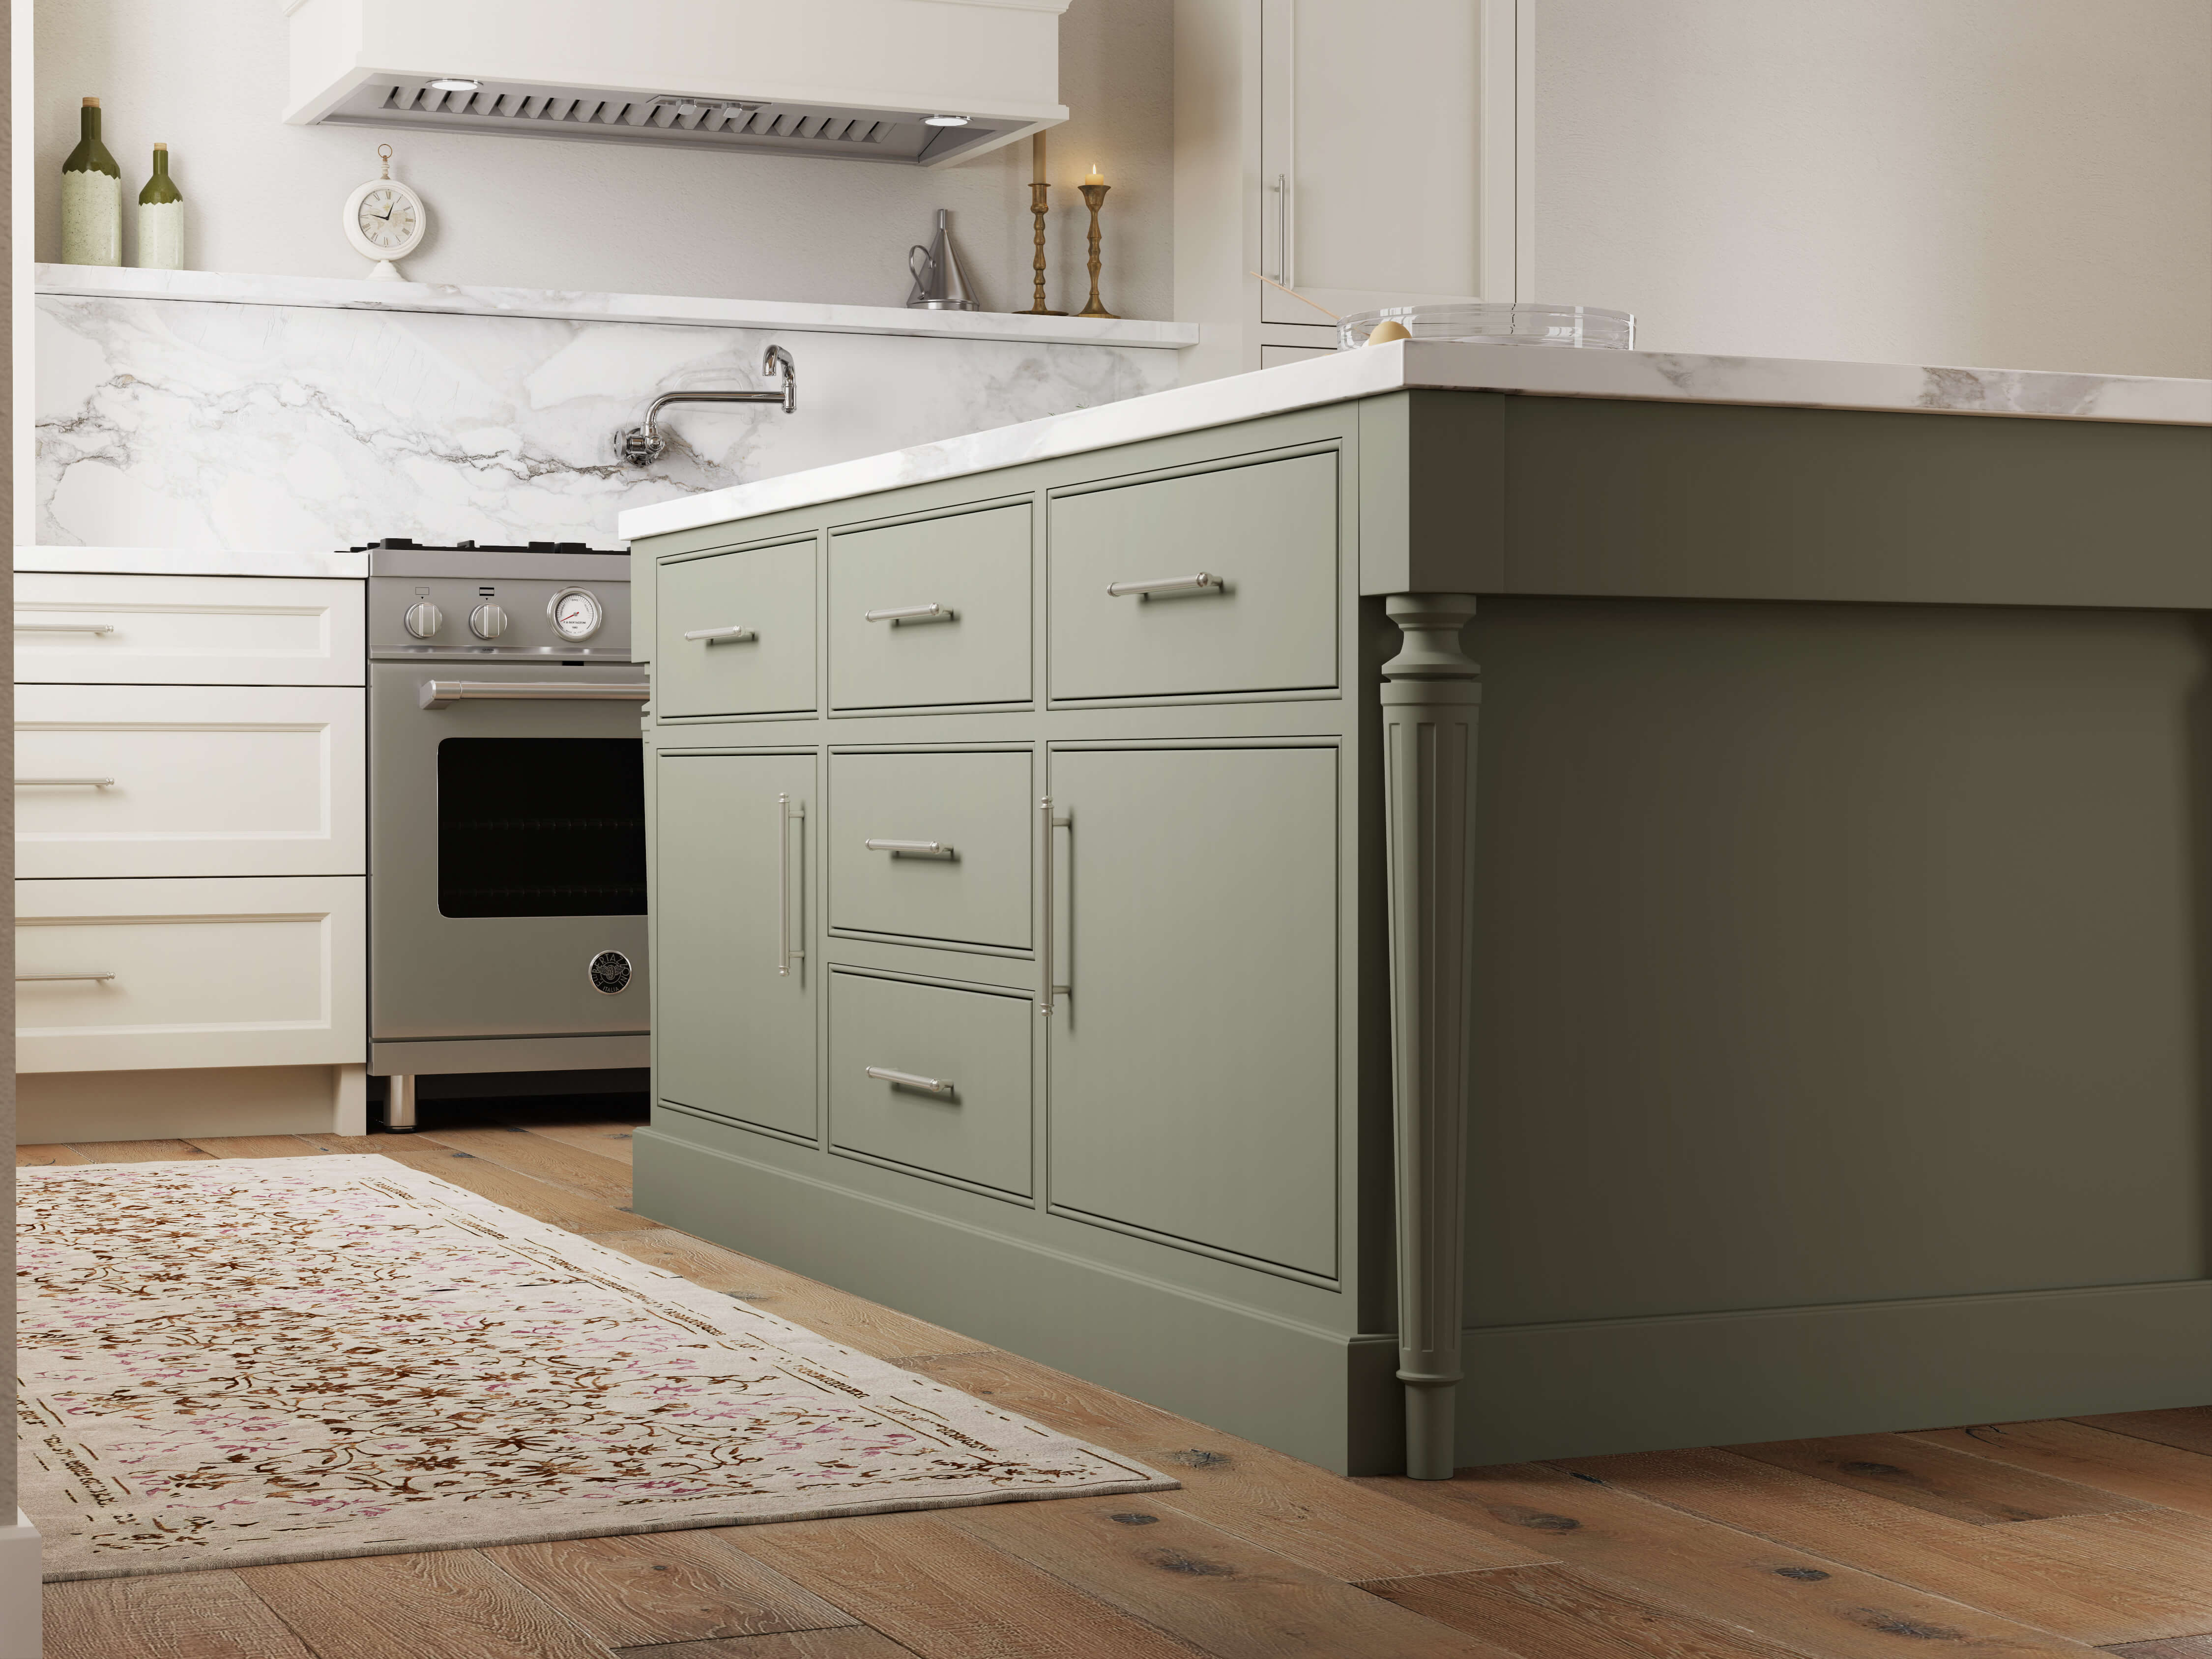 A light green painted kitchen island with a trendy painted finish.